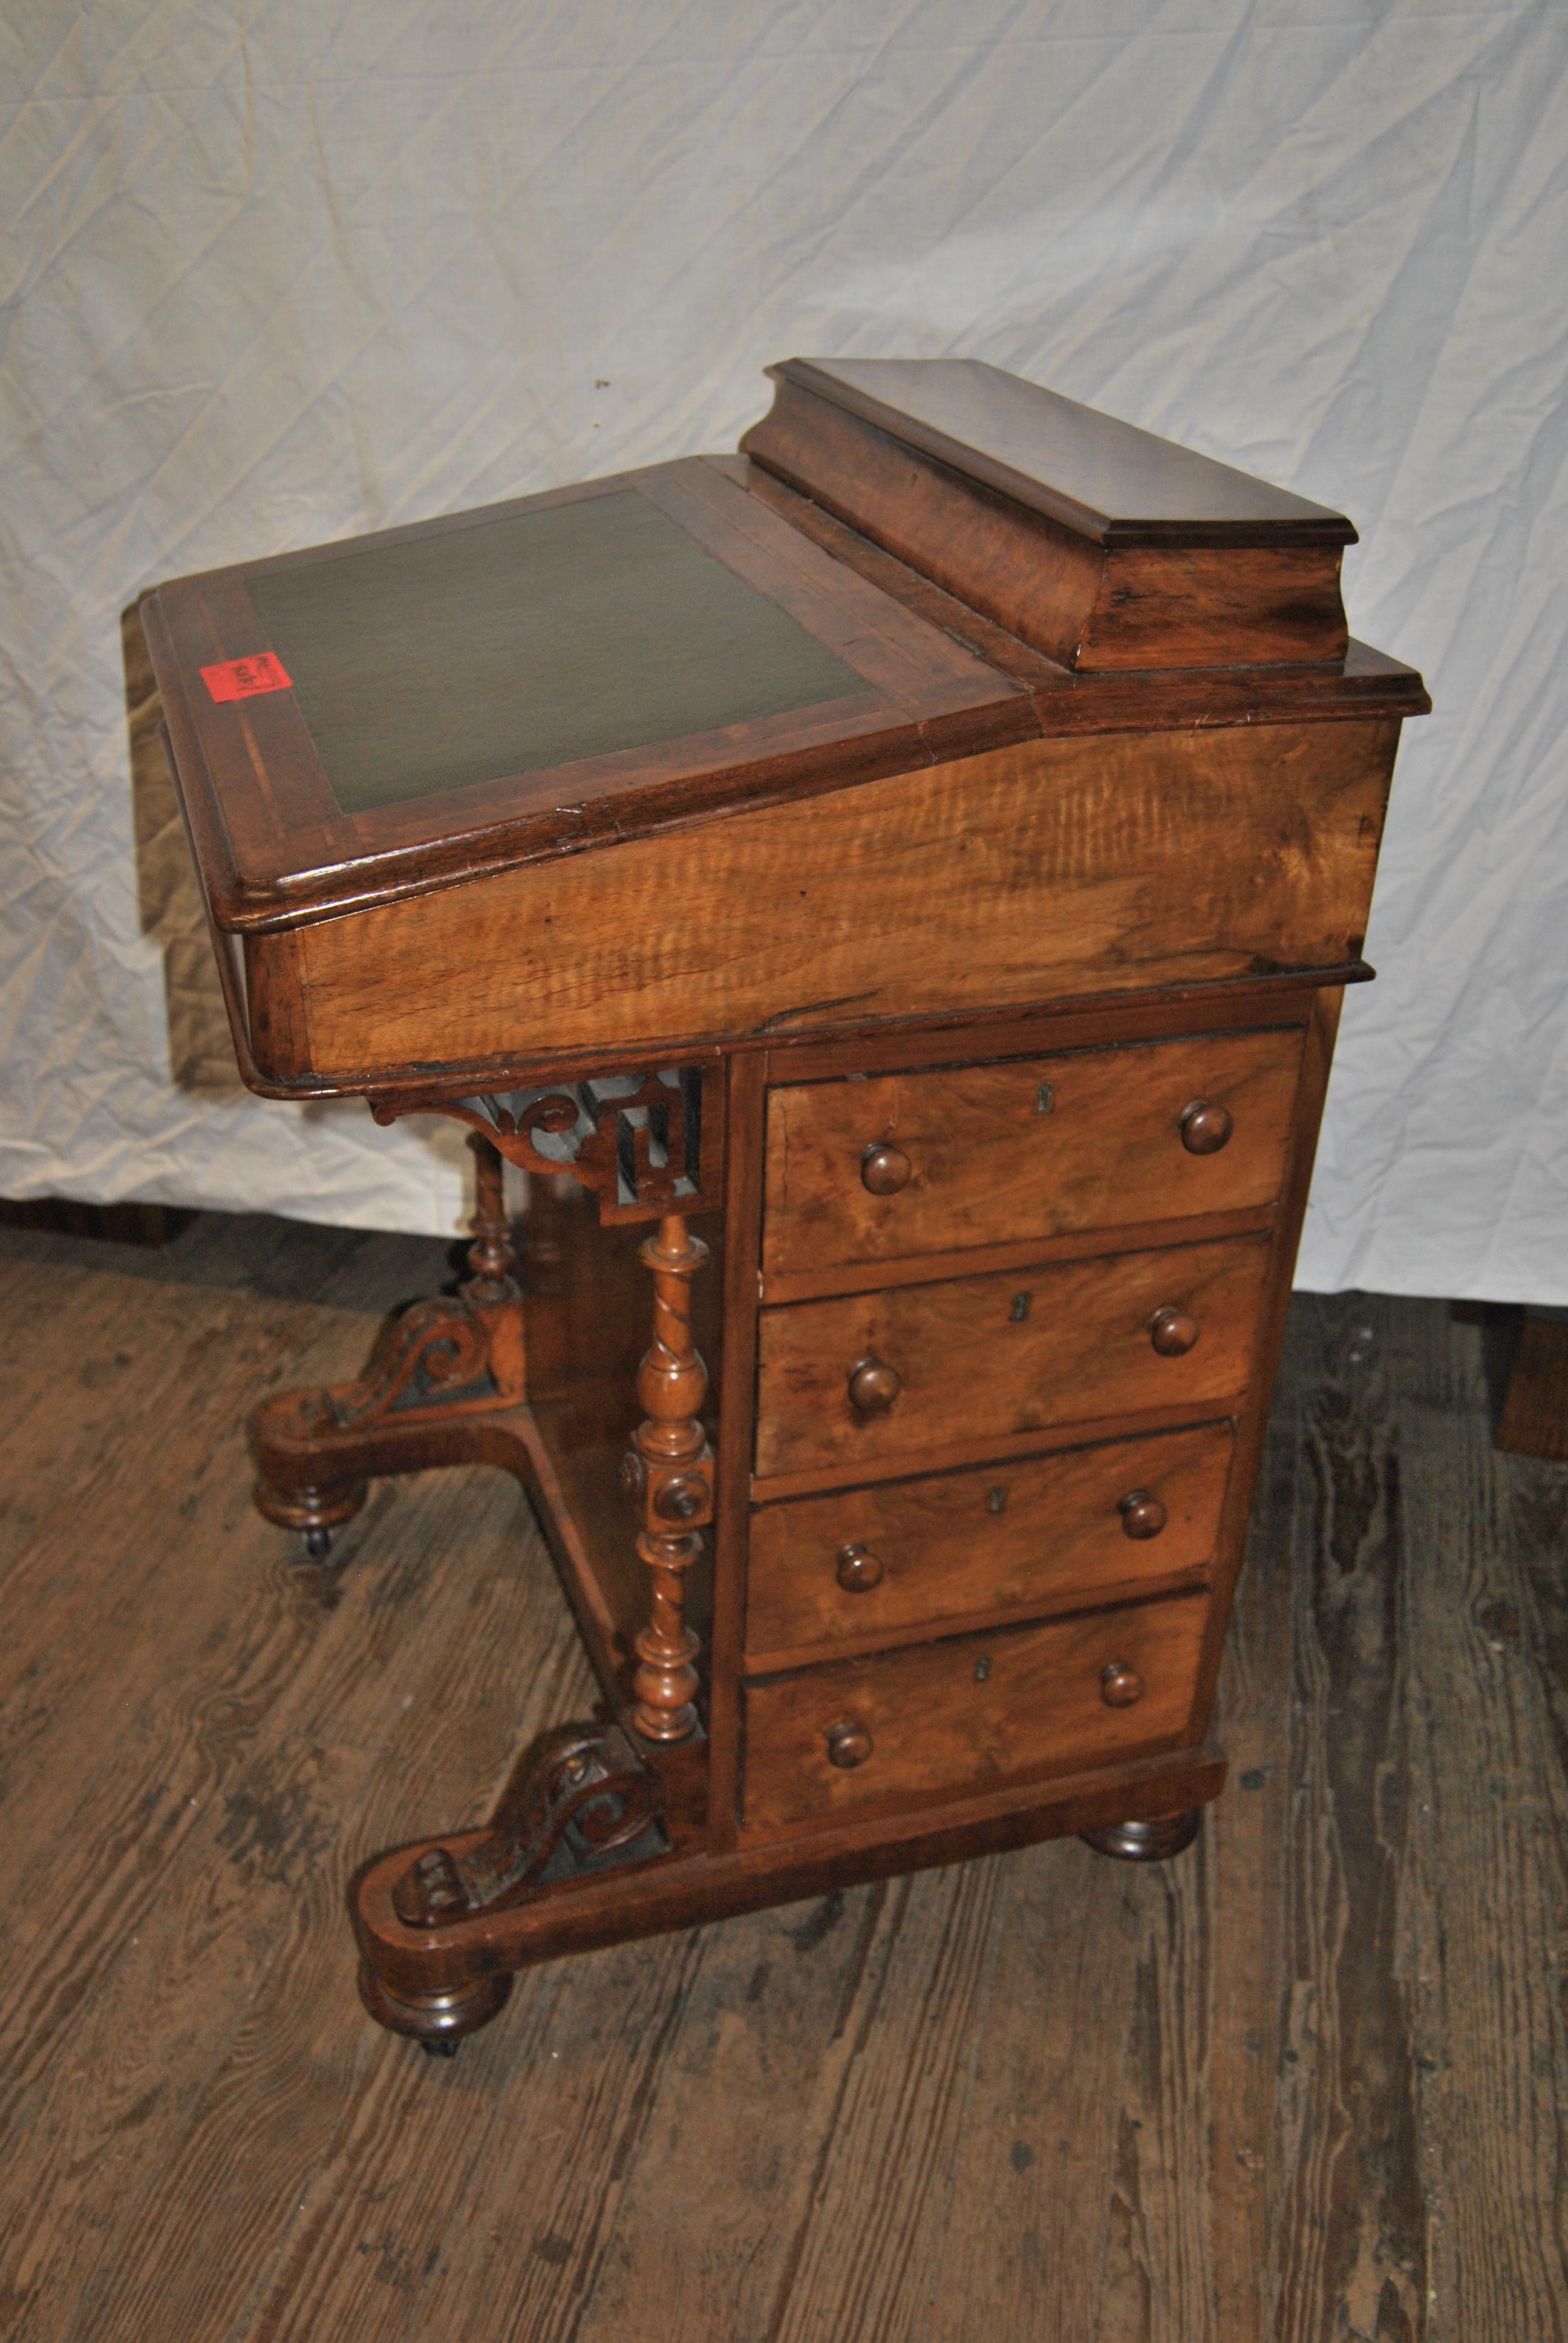 This is a Walnut Inlaid Davenport Desk made in England, circa 1870. The top gallery has a nicely molded edge and opens to reveal 10 open cubby holes / dividers for storage of paper, pens, Ink Wells, etc. The Green Leather Top writing surface also